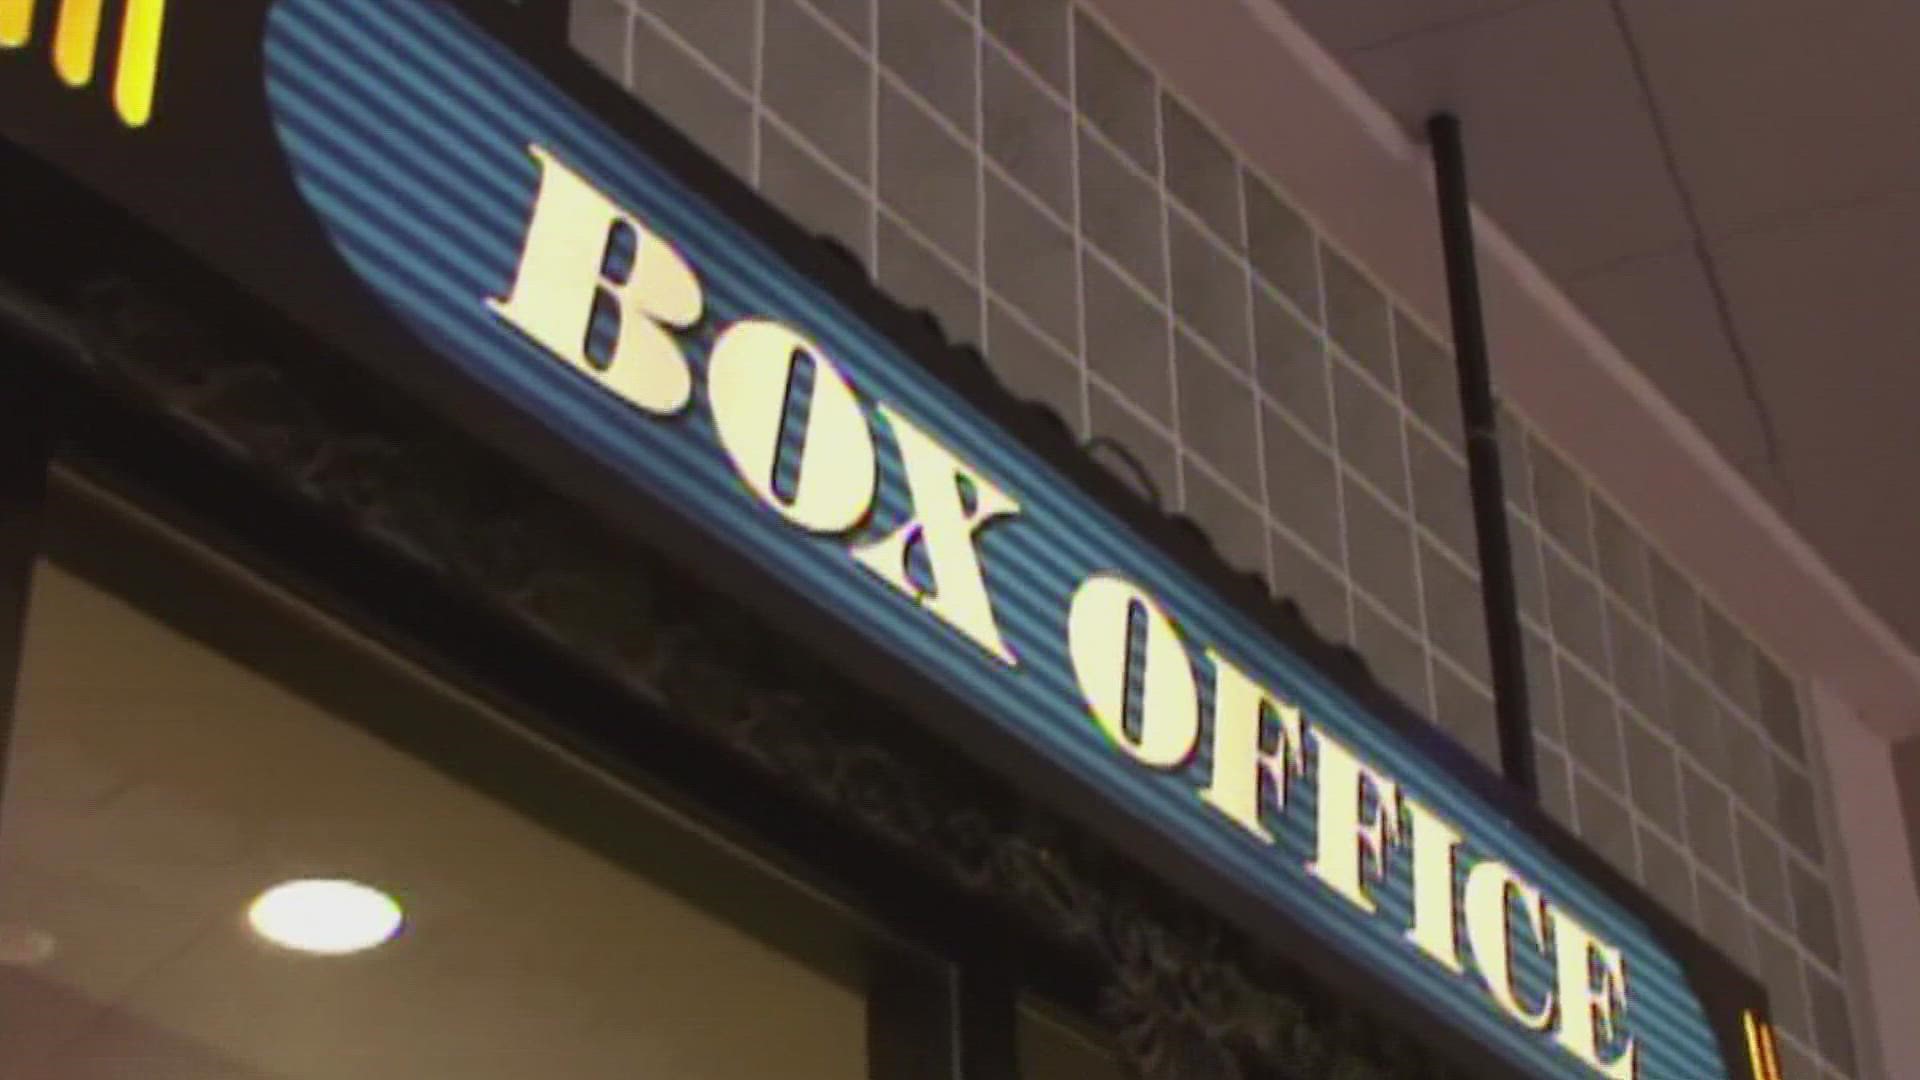 Labor Day weekend is generally pretty slow for the box office. Theater owners want to change that.